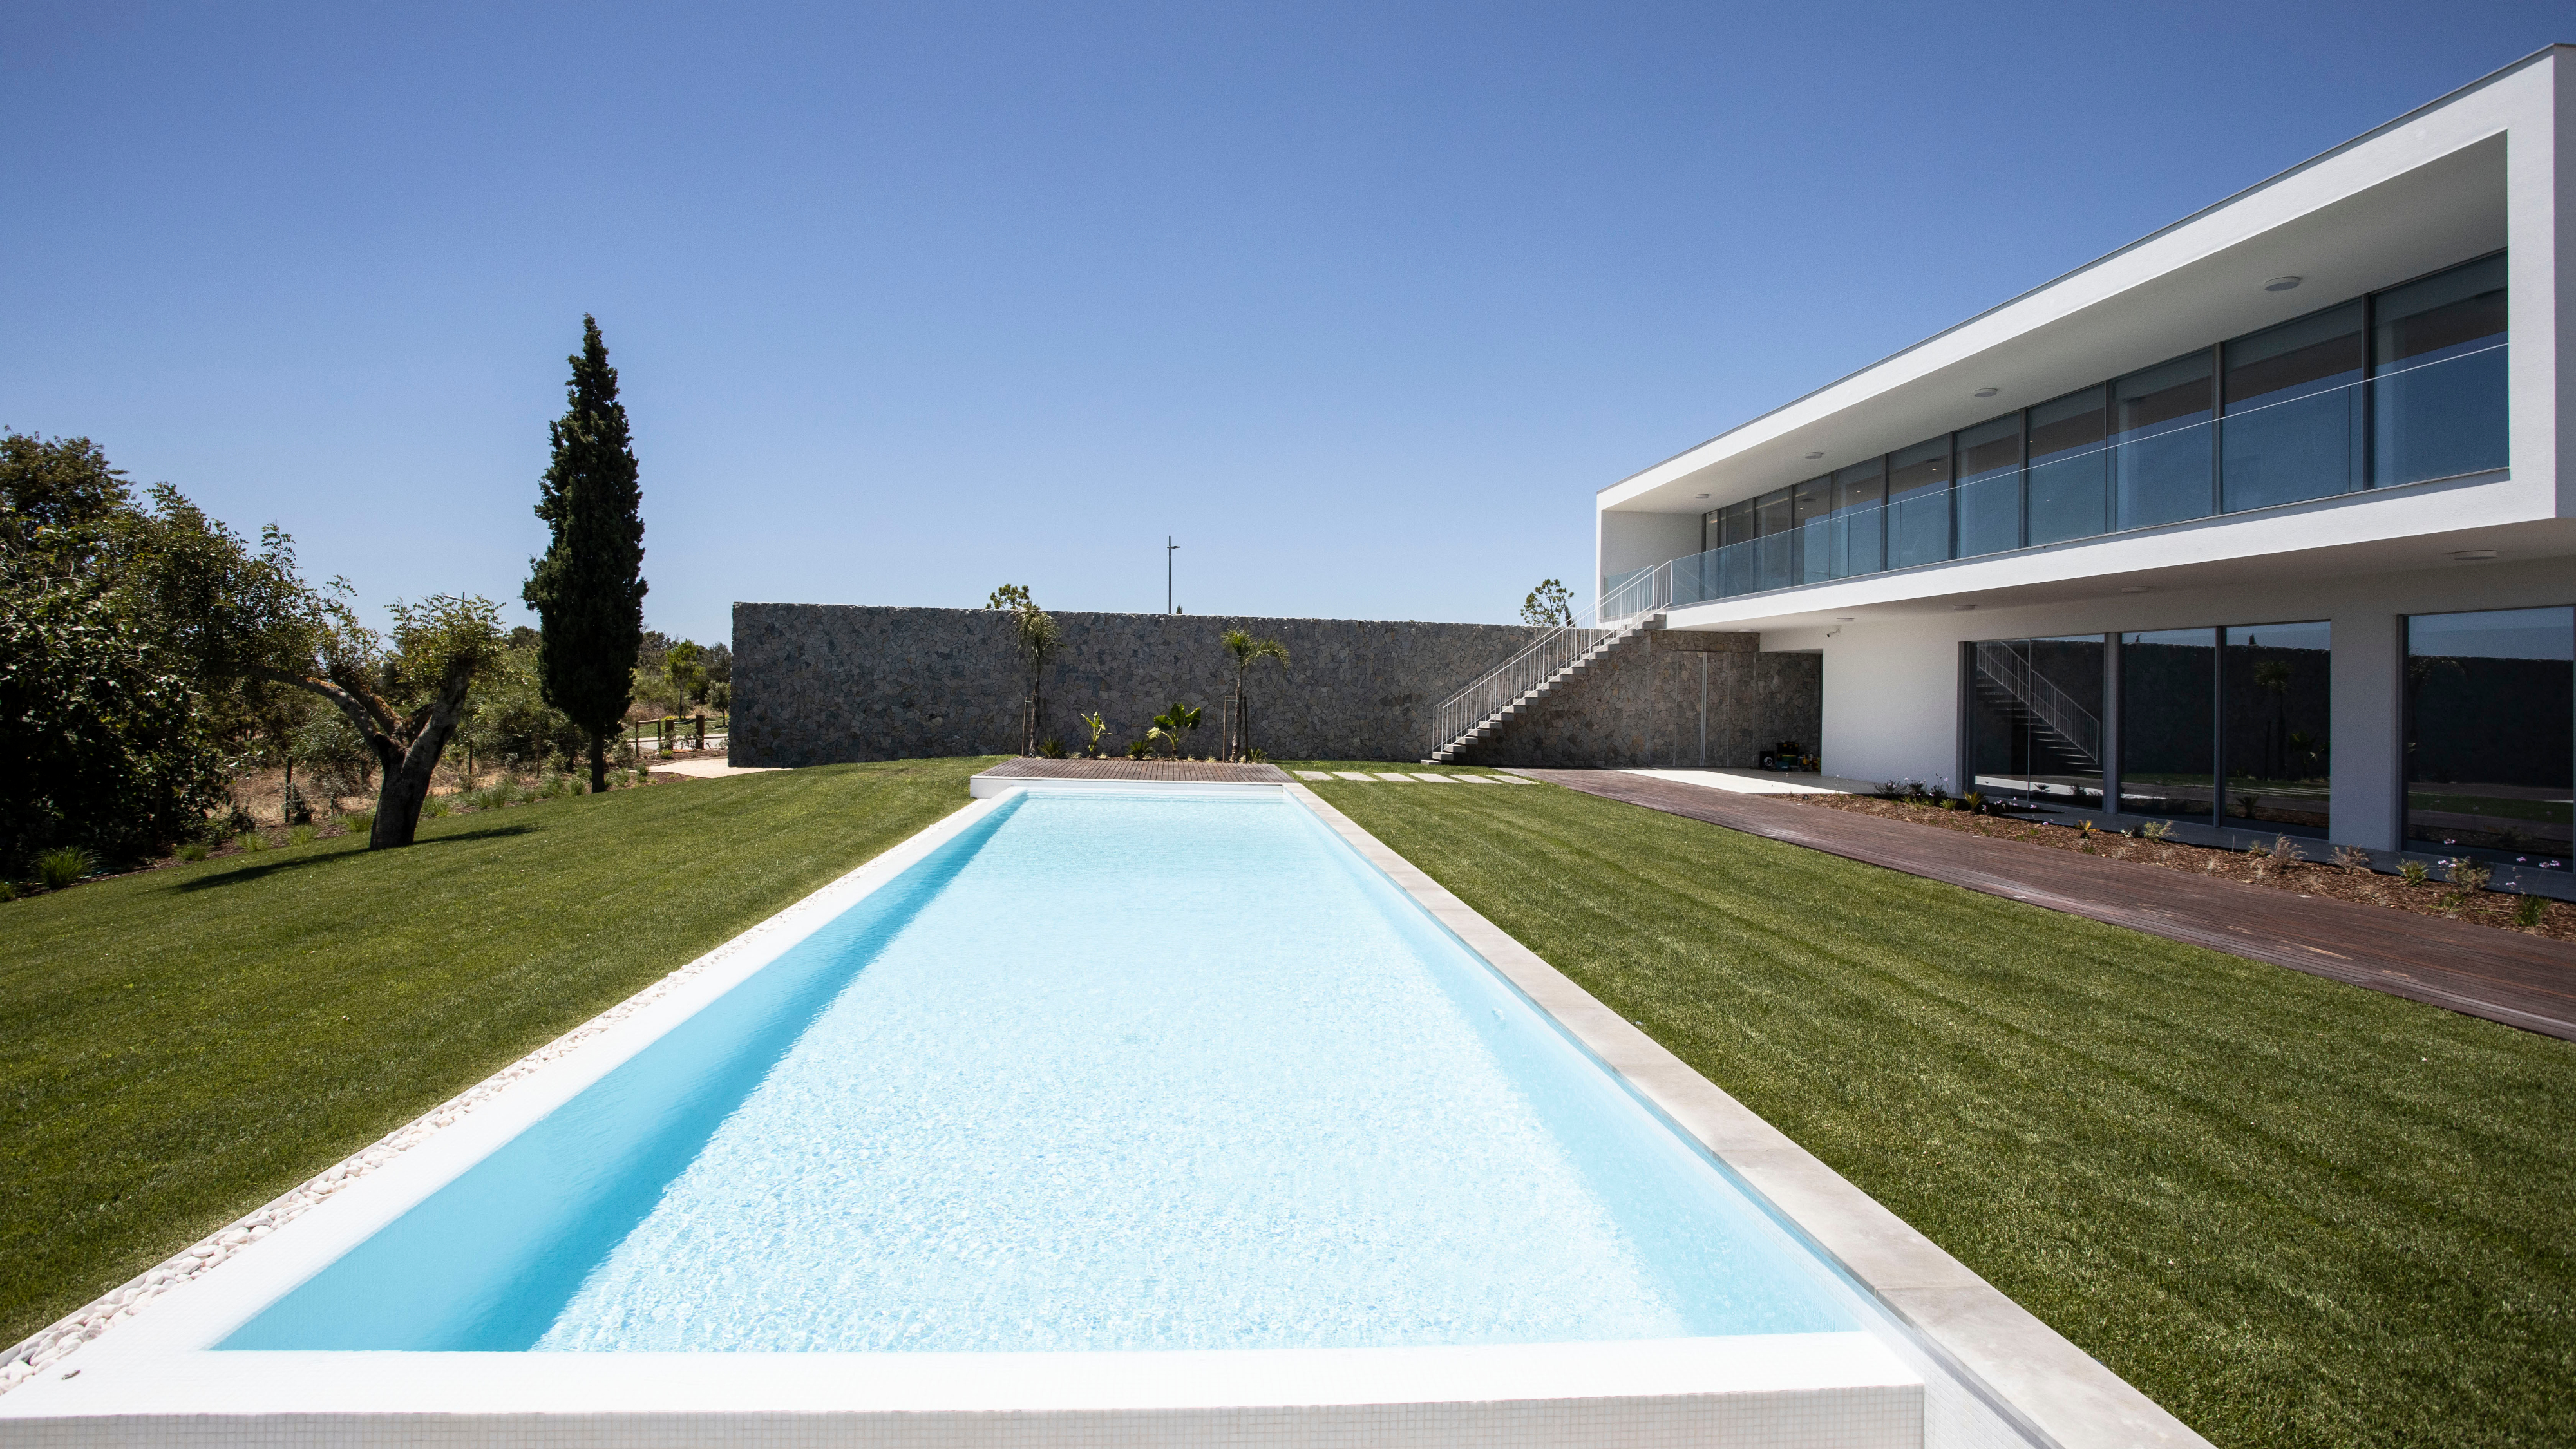 Breath-taking 3+1 Bedroom Villa with Large Pool and Sea Views in Palmares Golf Resort | LG1877 